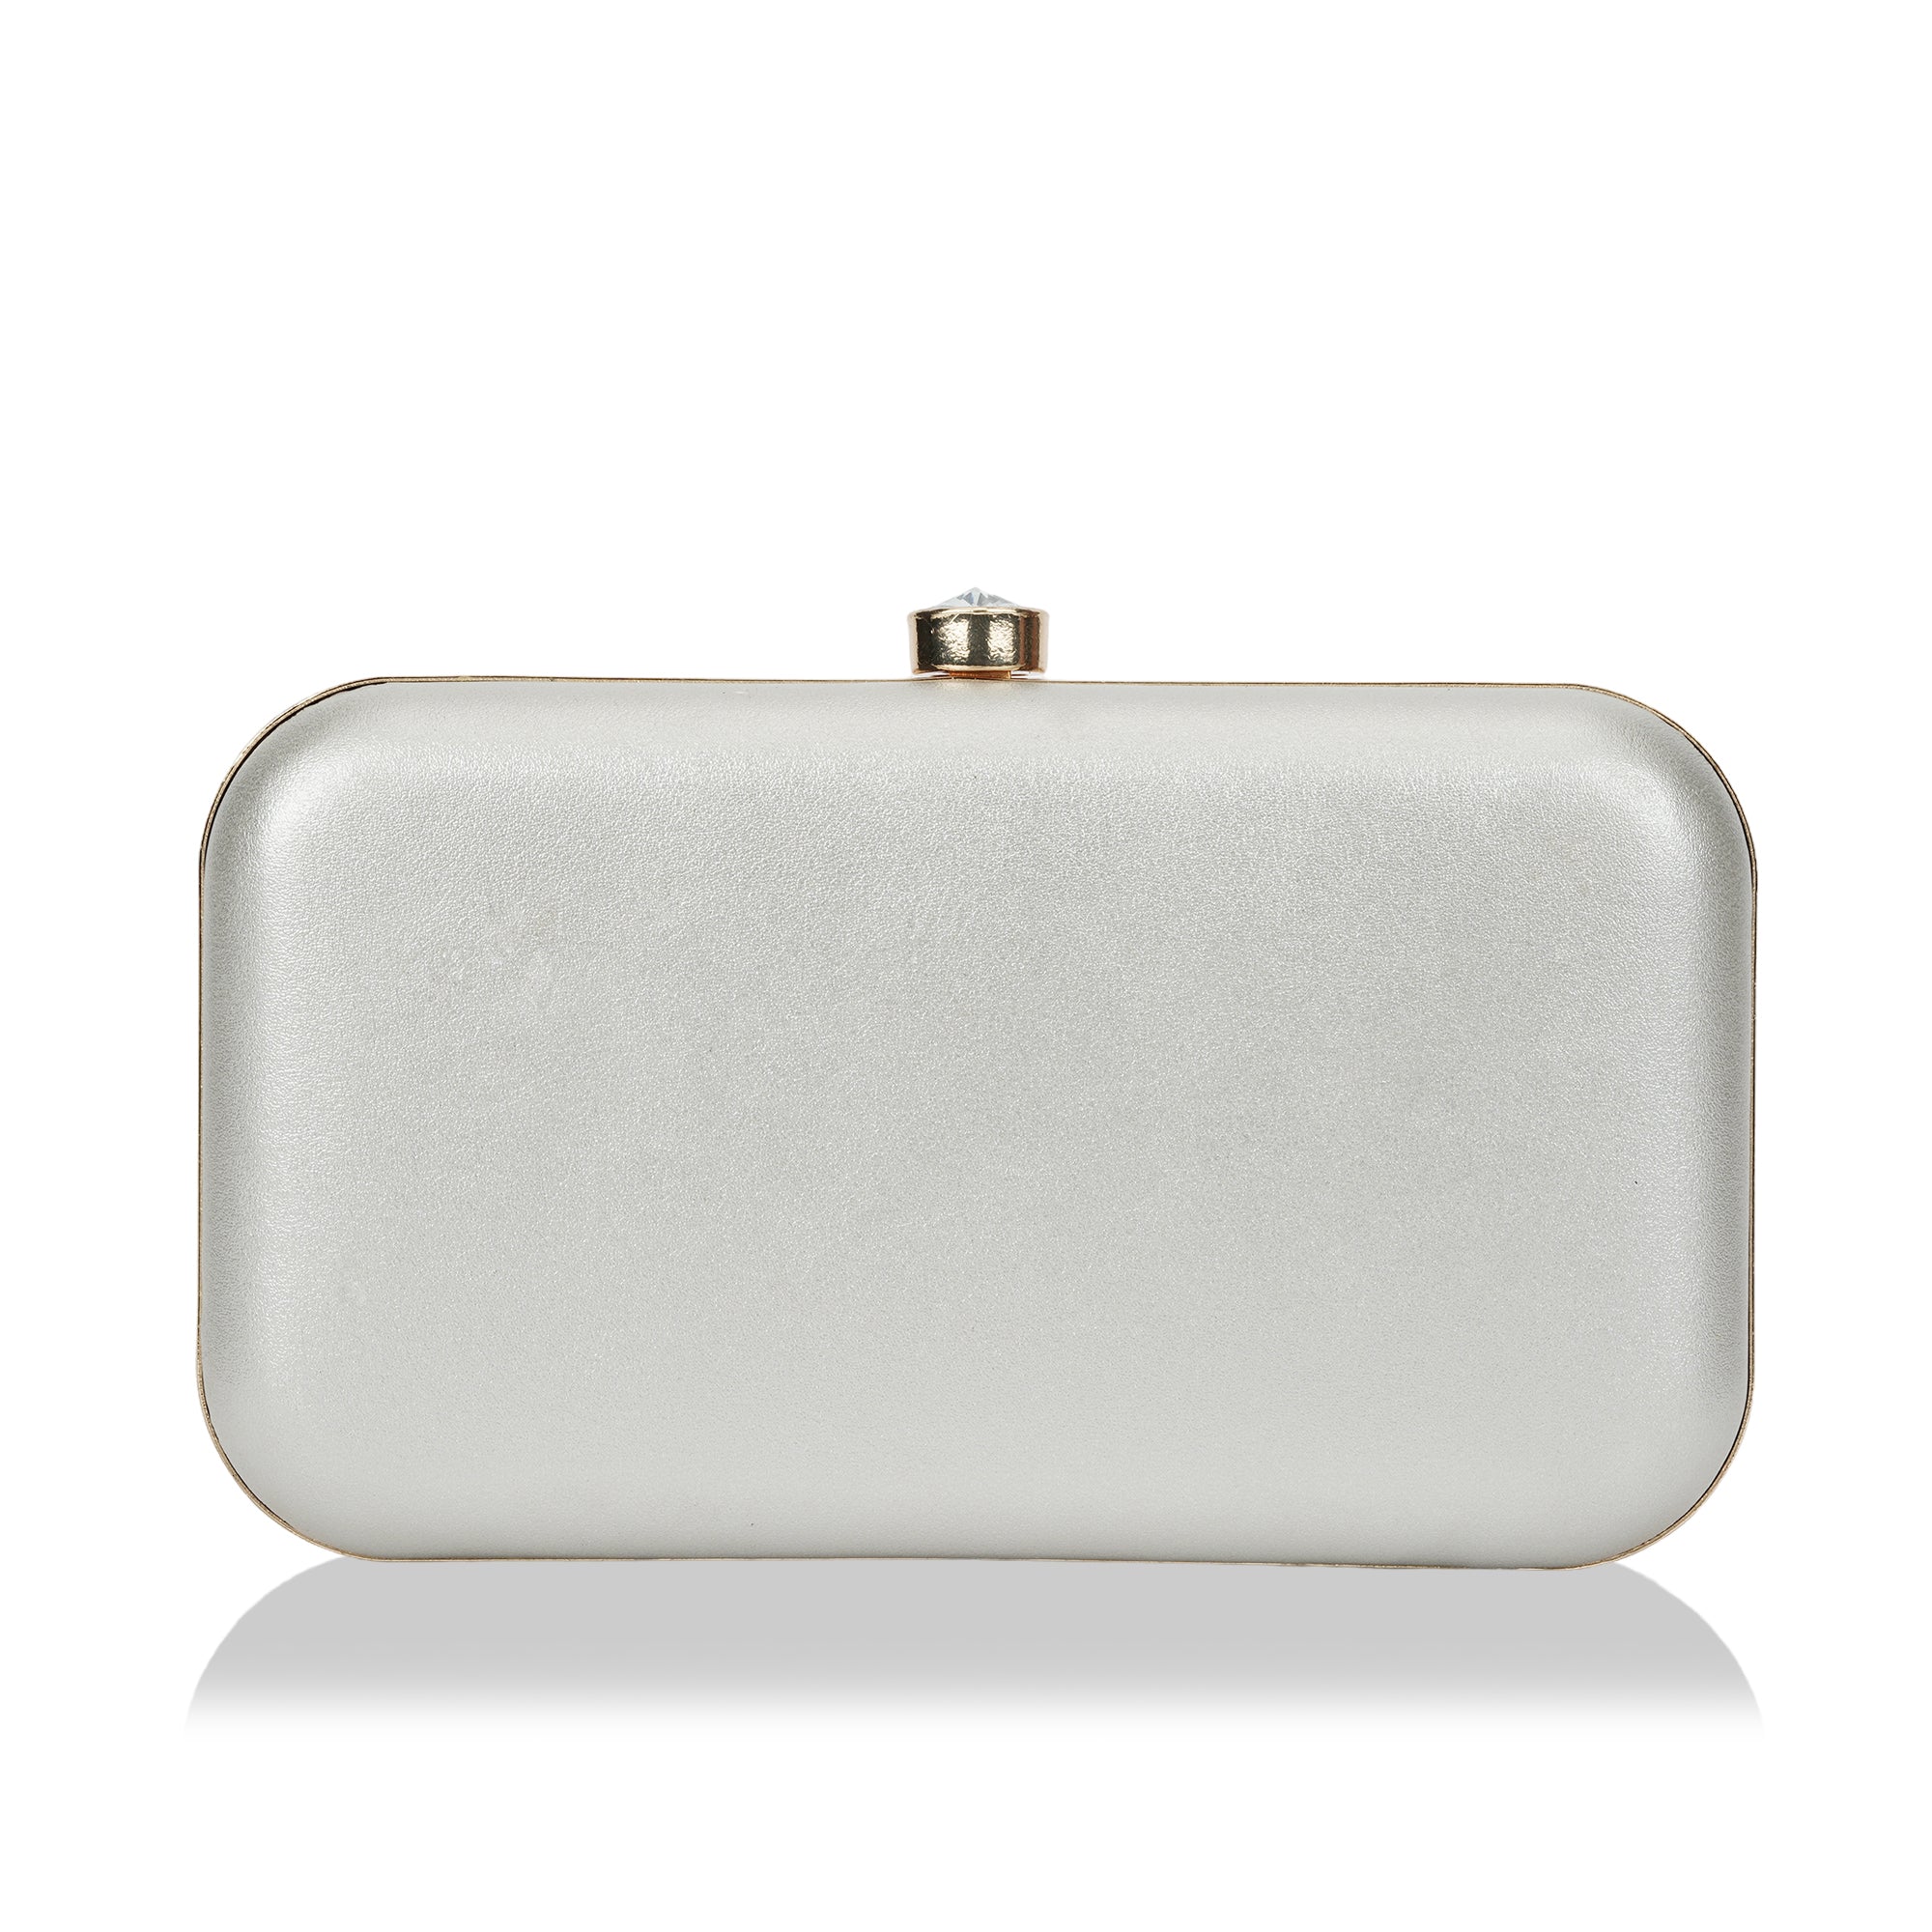 Hollywood Inspired Vintage Satin Glamour Clutch Purse - White